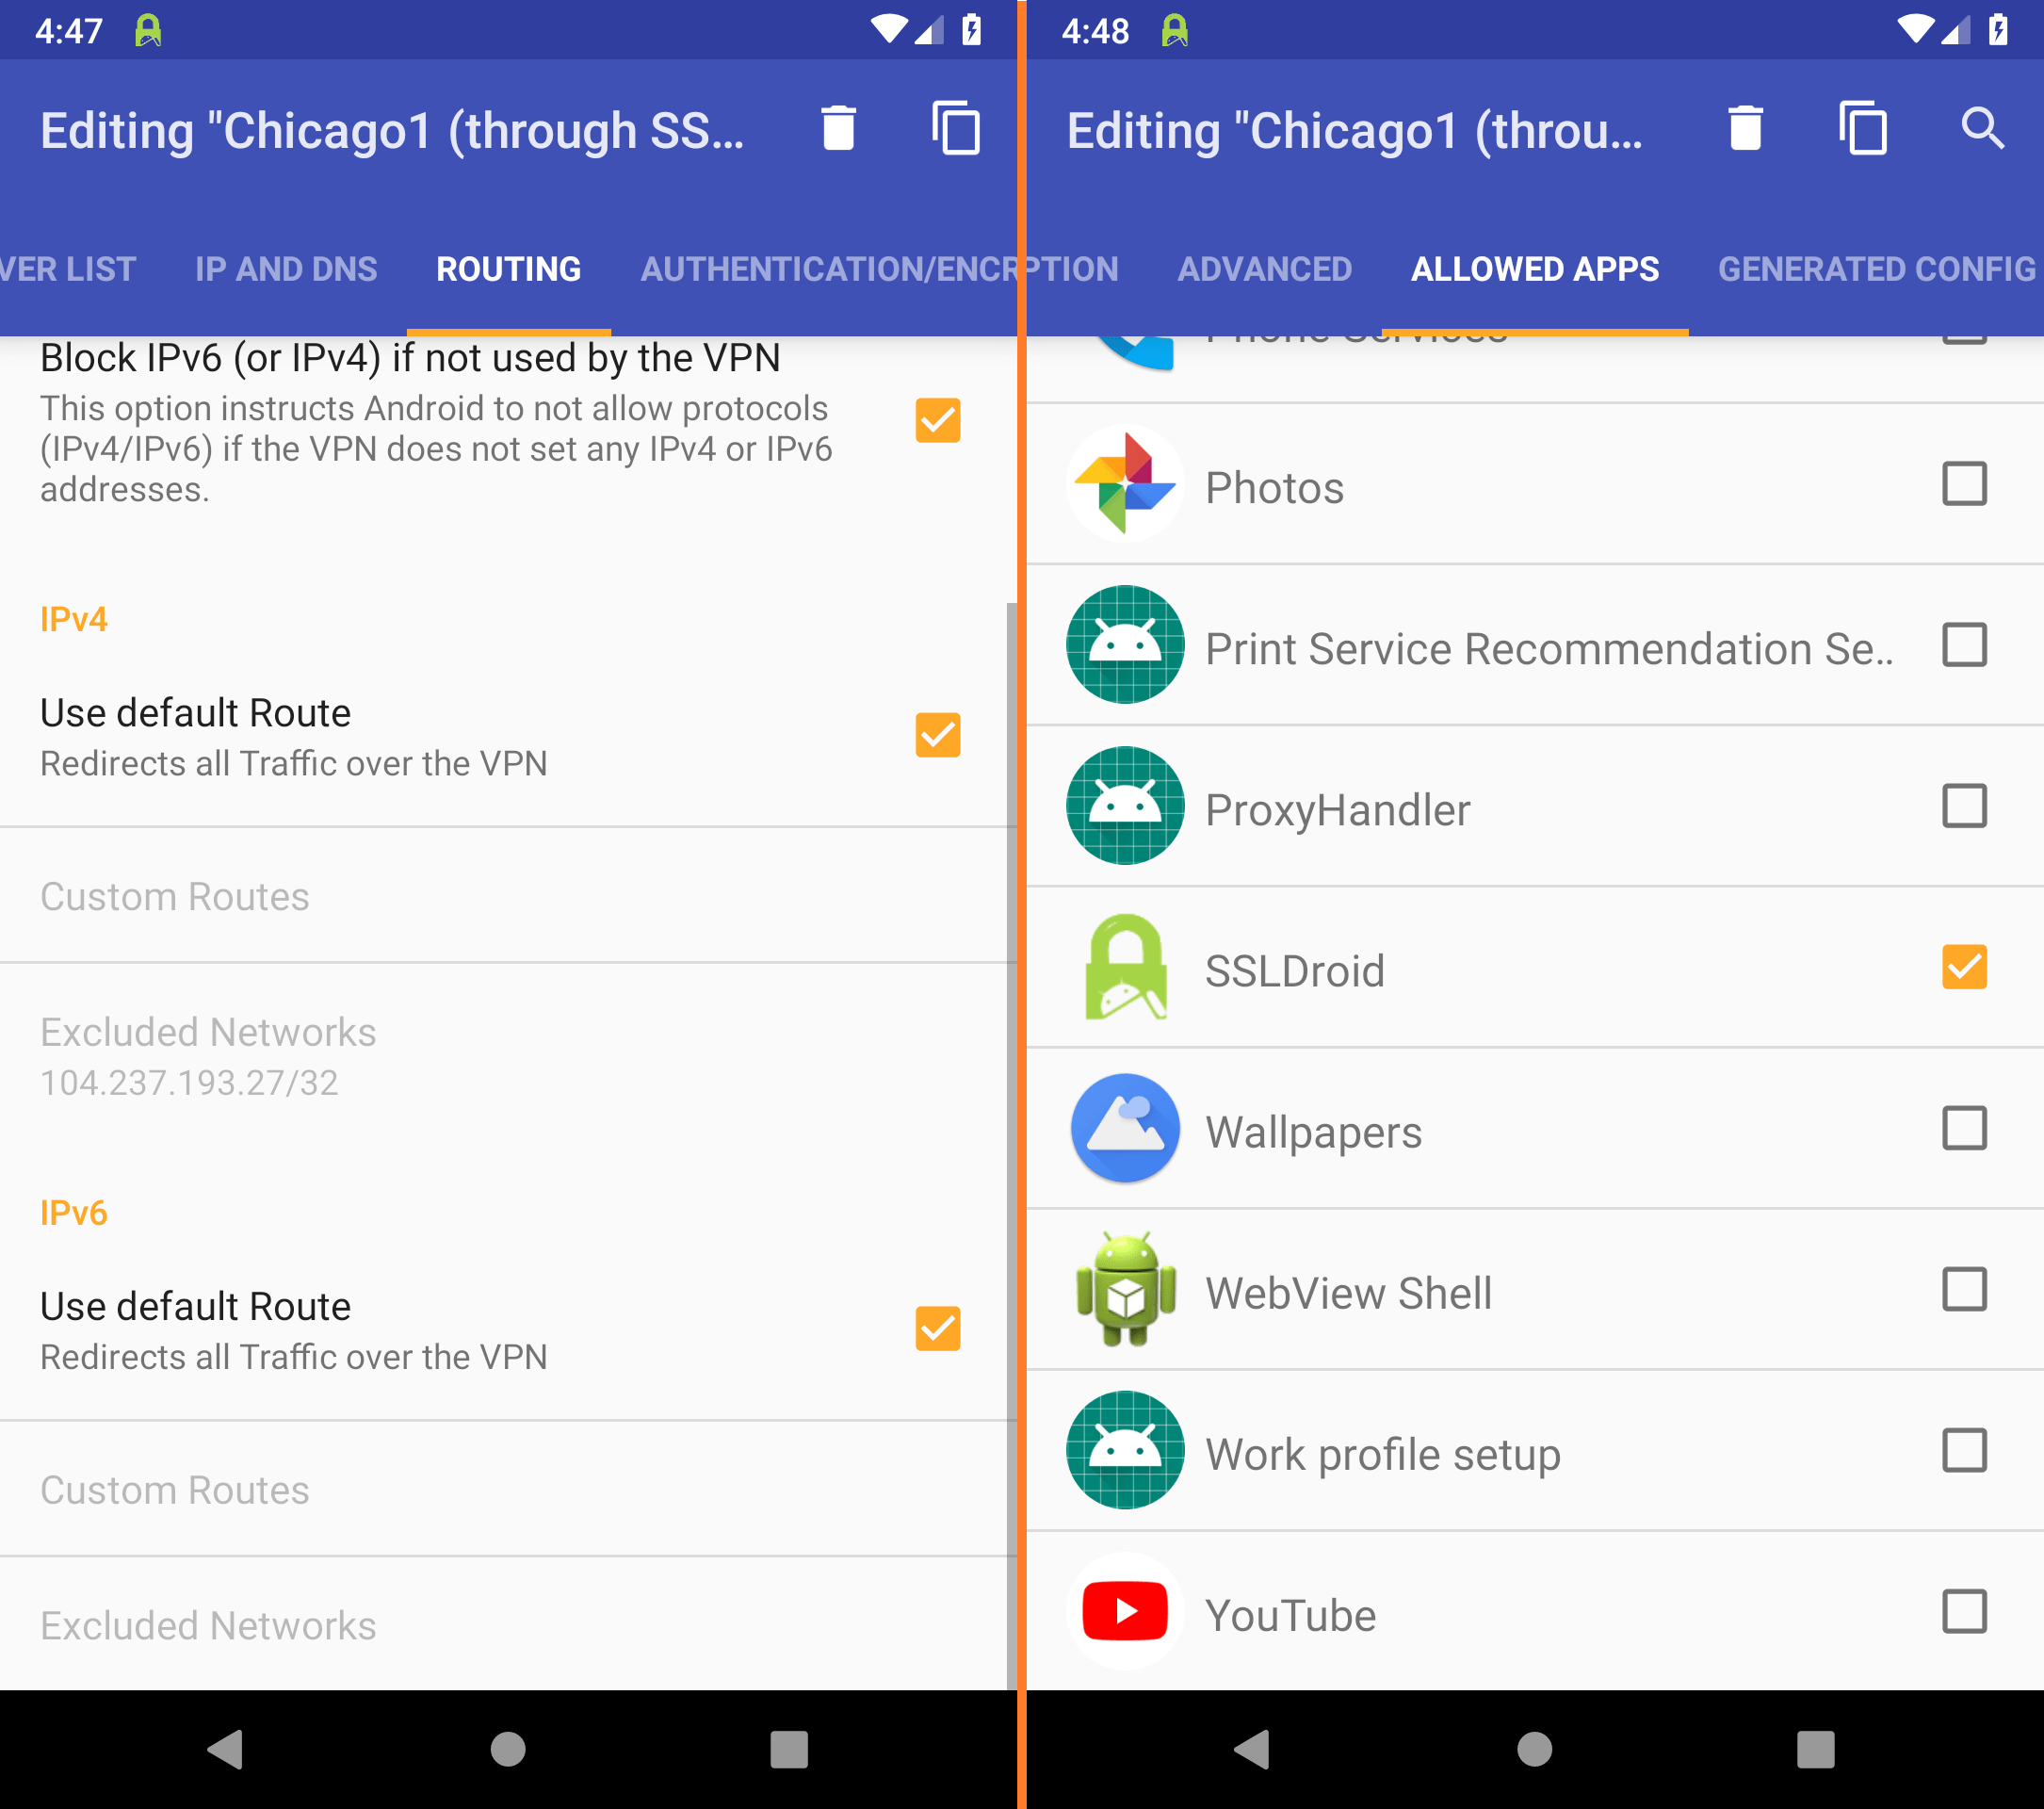 Stealth VPN on Android: Use default route and add an exemption for SSLDroid | OpenVPN through SSLDroid tunnel (Stealth VPN)